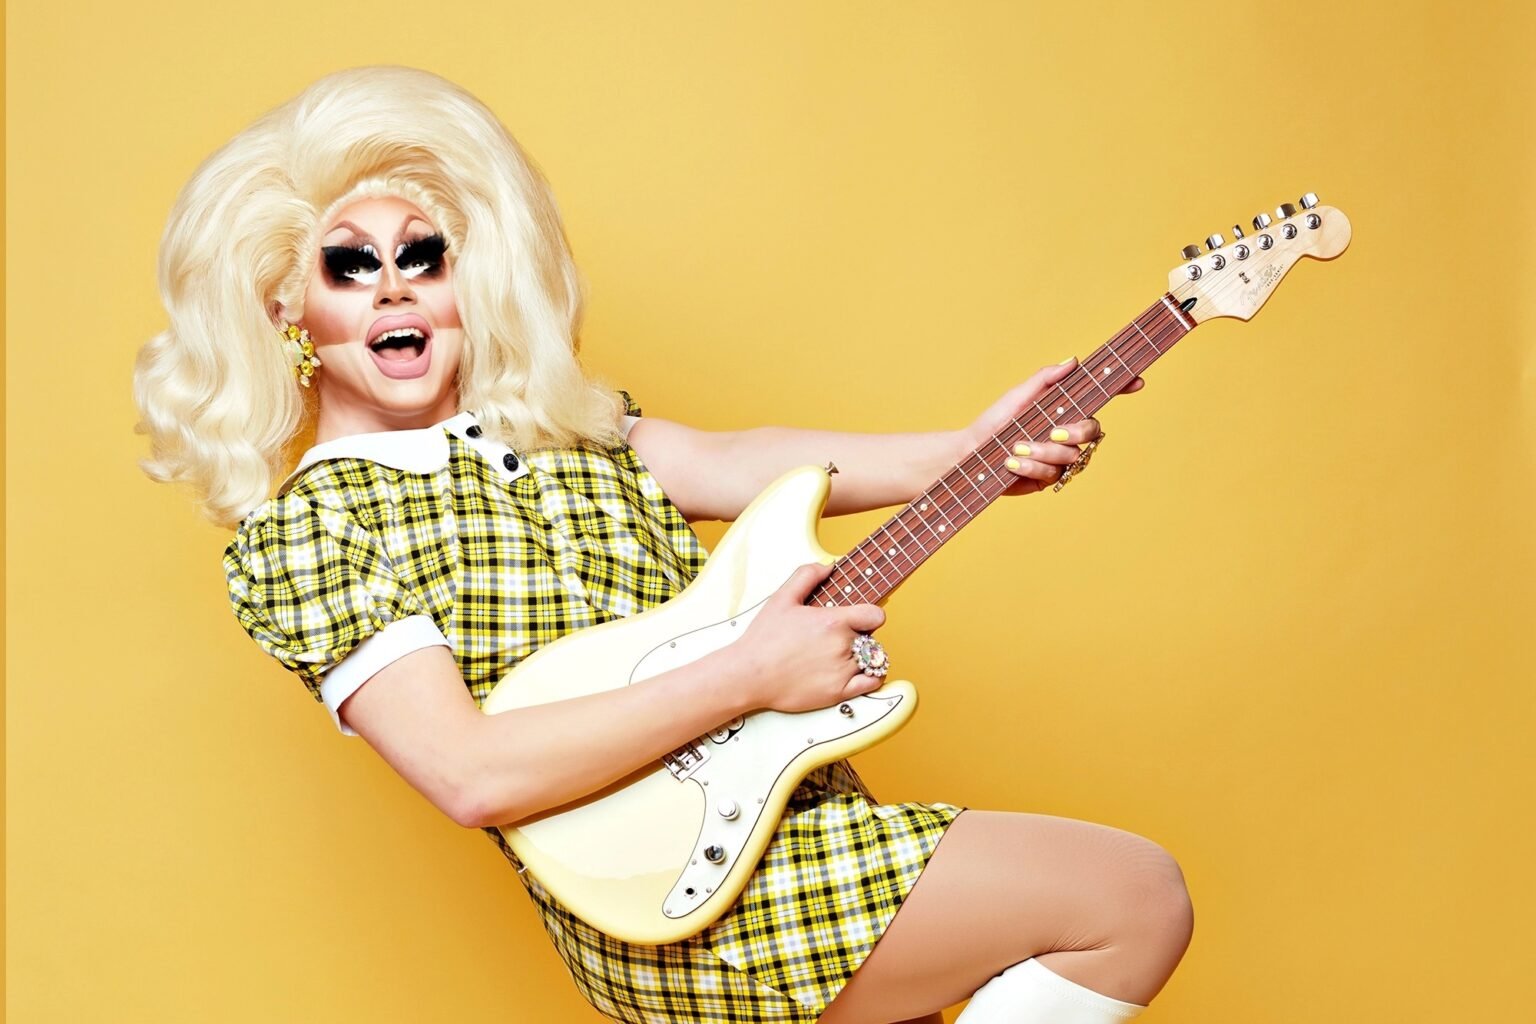 For those of us who love drag performance, there's no one more beloved than Trixie Mattel. Is she a doll at heart? Let's spill the tea.